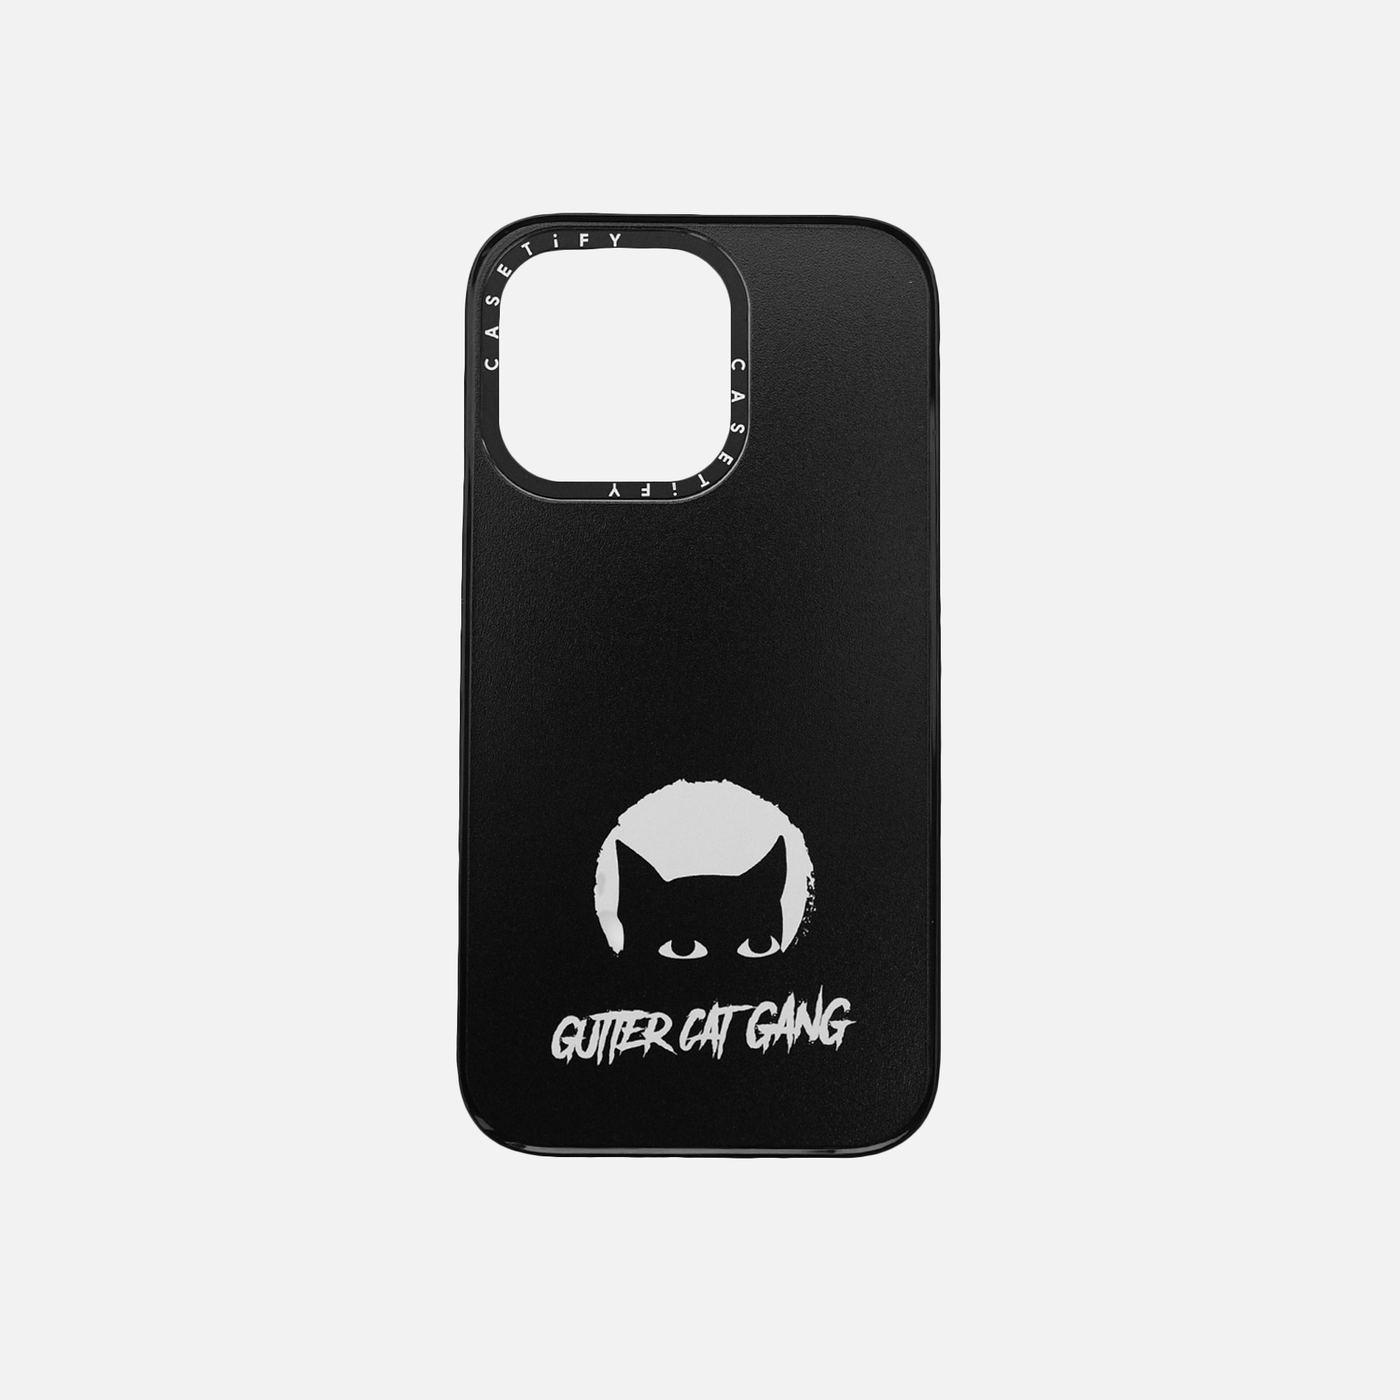 GUTTER NYCITY iPhone 13 Pro Max Case